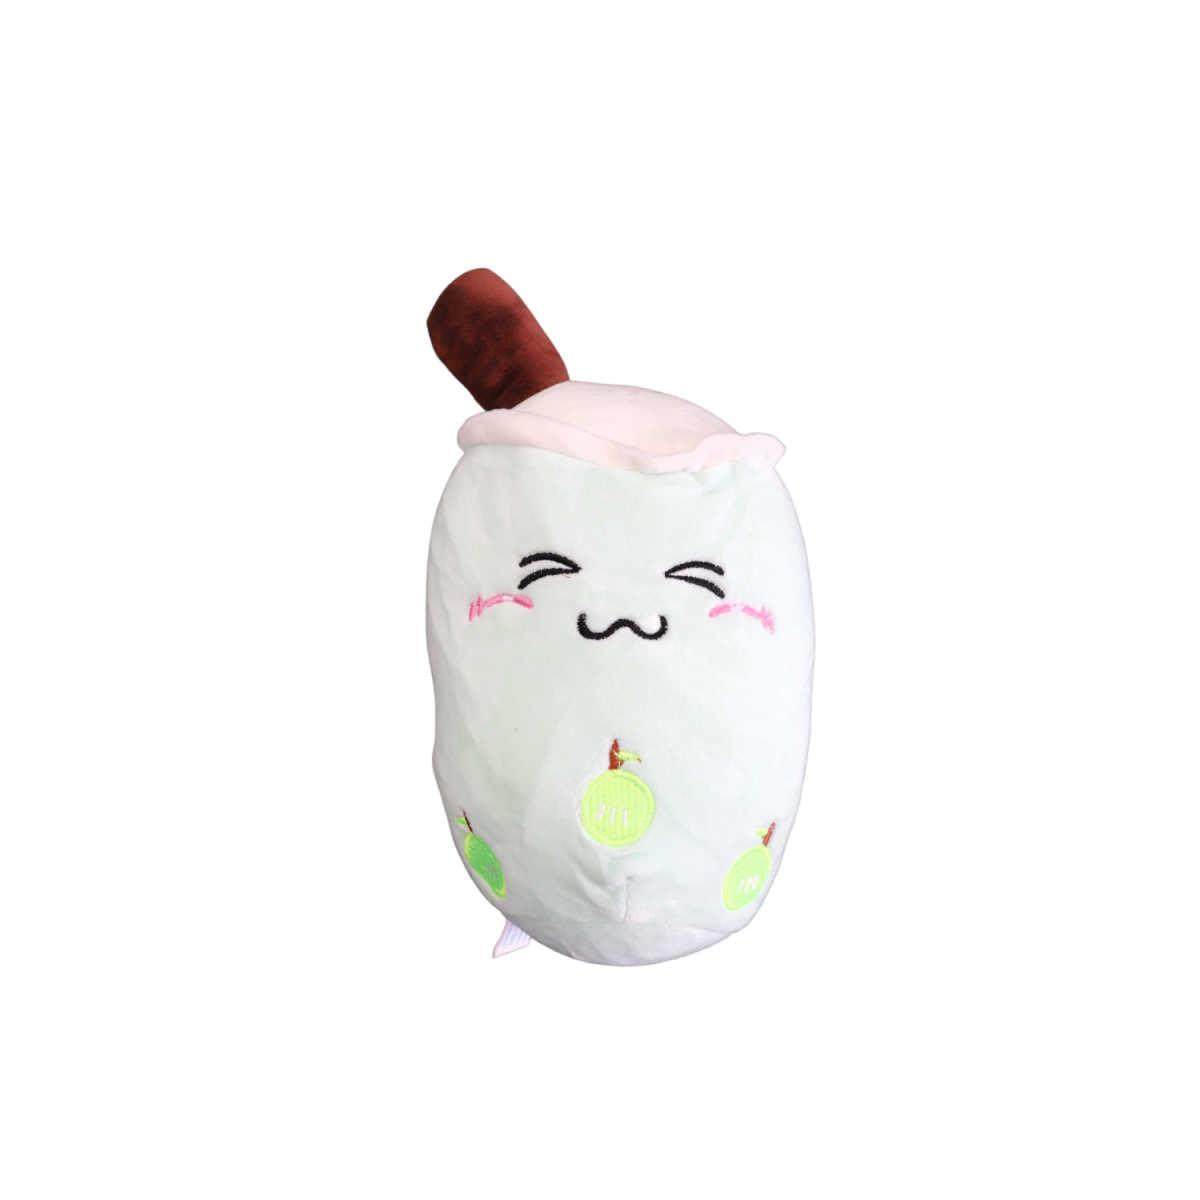 Boba Tea "S" Size Apple Plushie Toy (Closed Eyes) - 10 Inches Tall/ 5 Inches Wide-Plushie-Zobie Productions-Zobie Productions